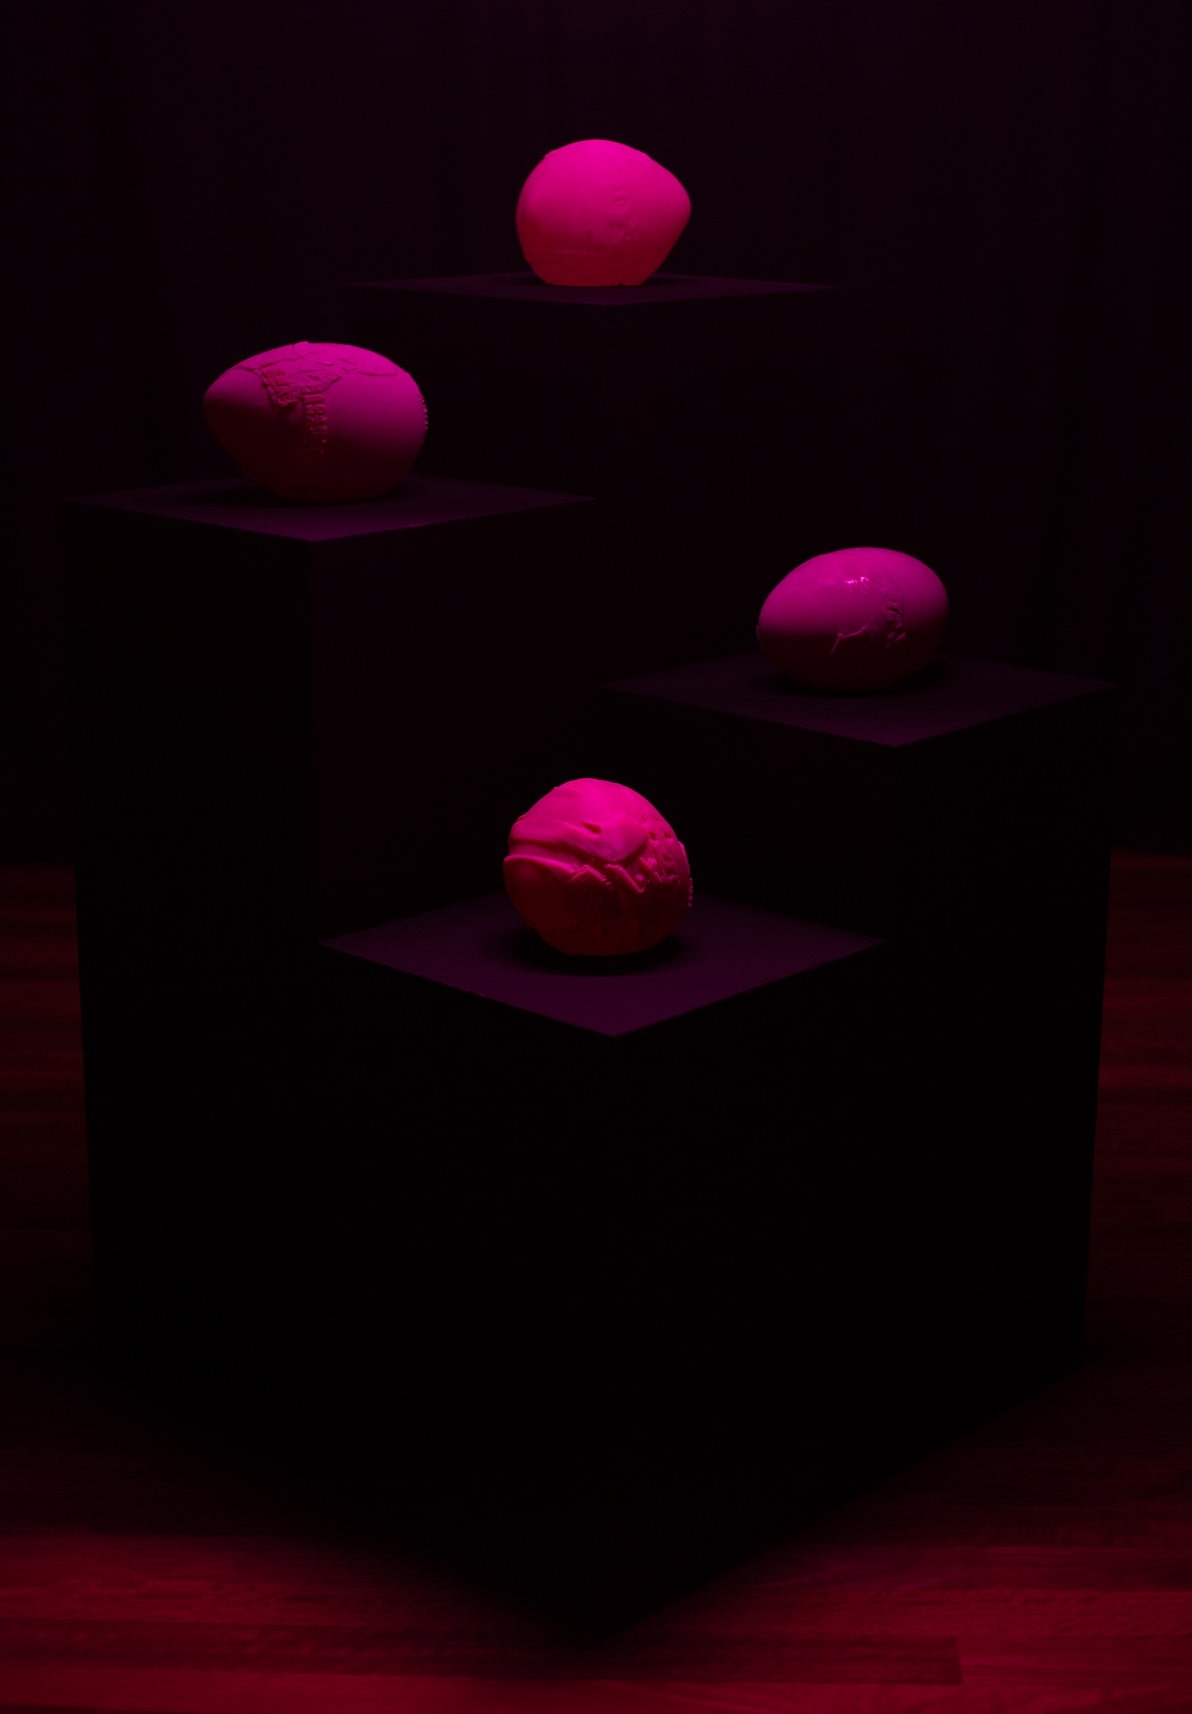 A darkly lit room, with woodeen floor boards and black curtains with four black plinths of different heights centered in the middle with four different bright pink blobs centered on each plinth. Each of the blobs have distored images of faces and Chinese karaoke characters.